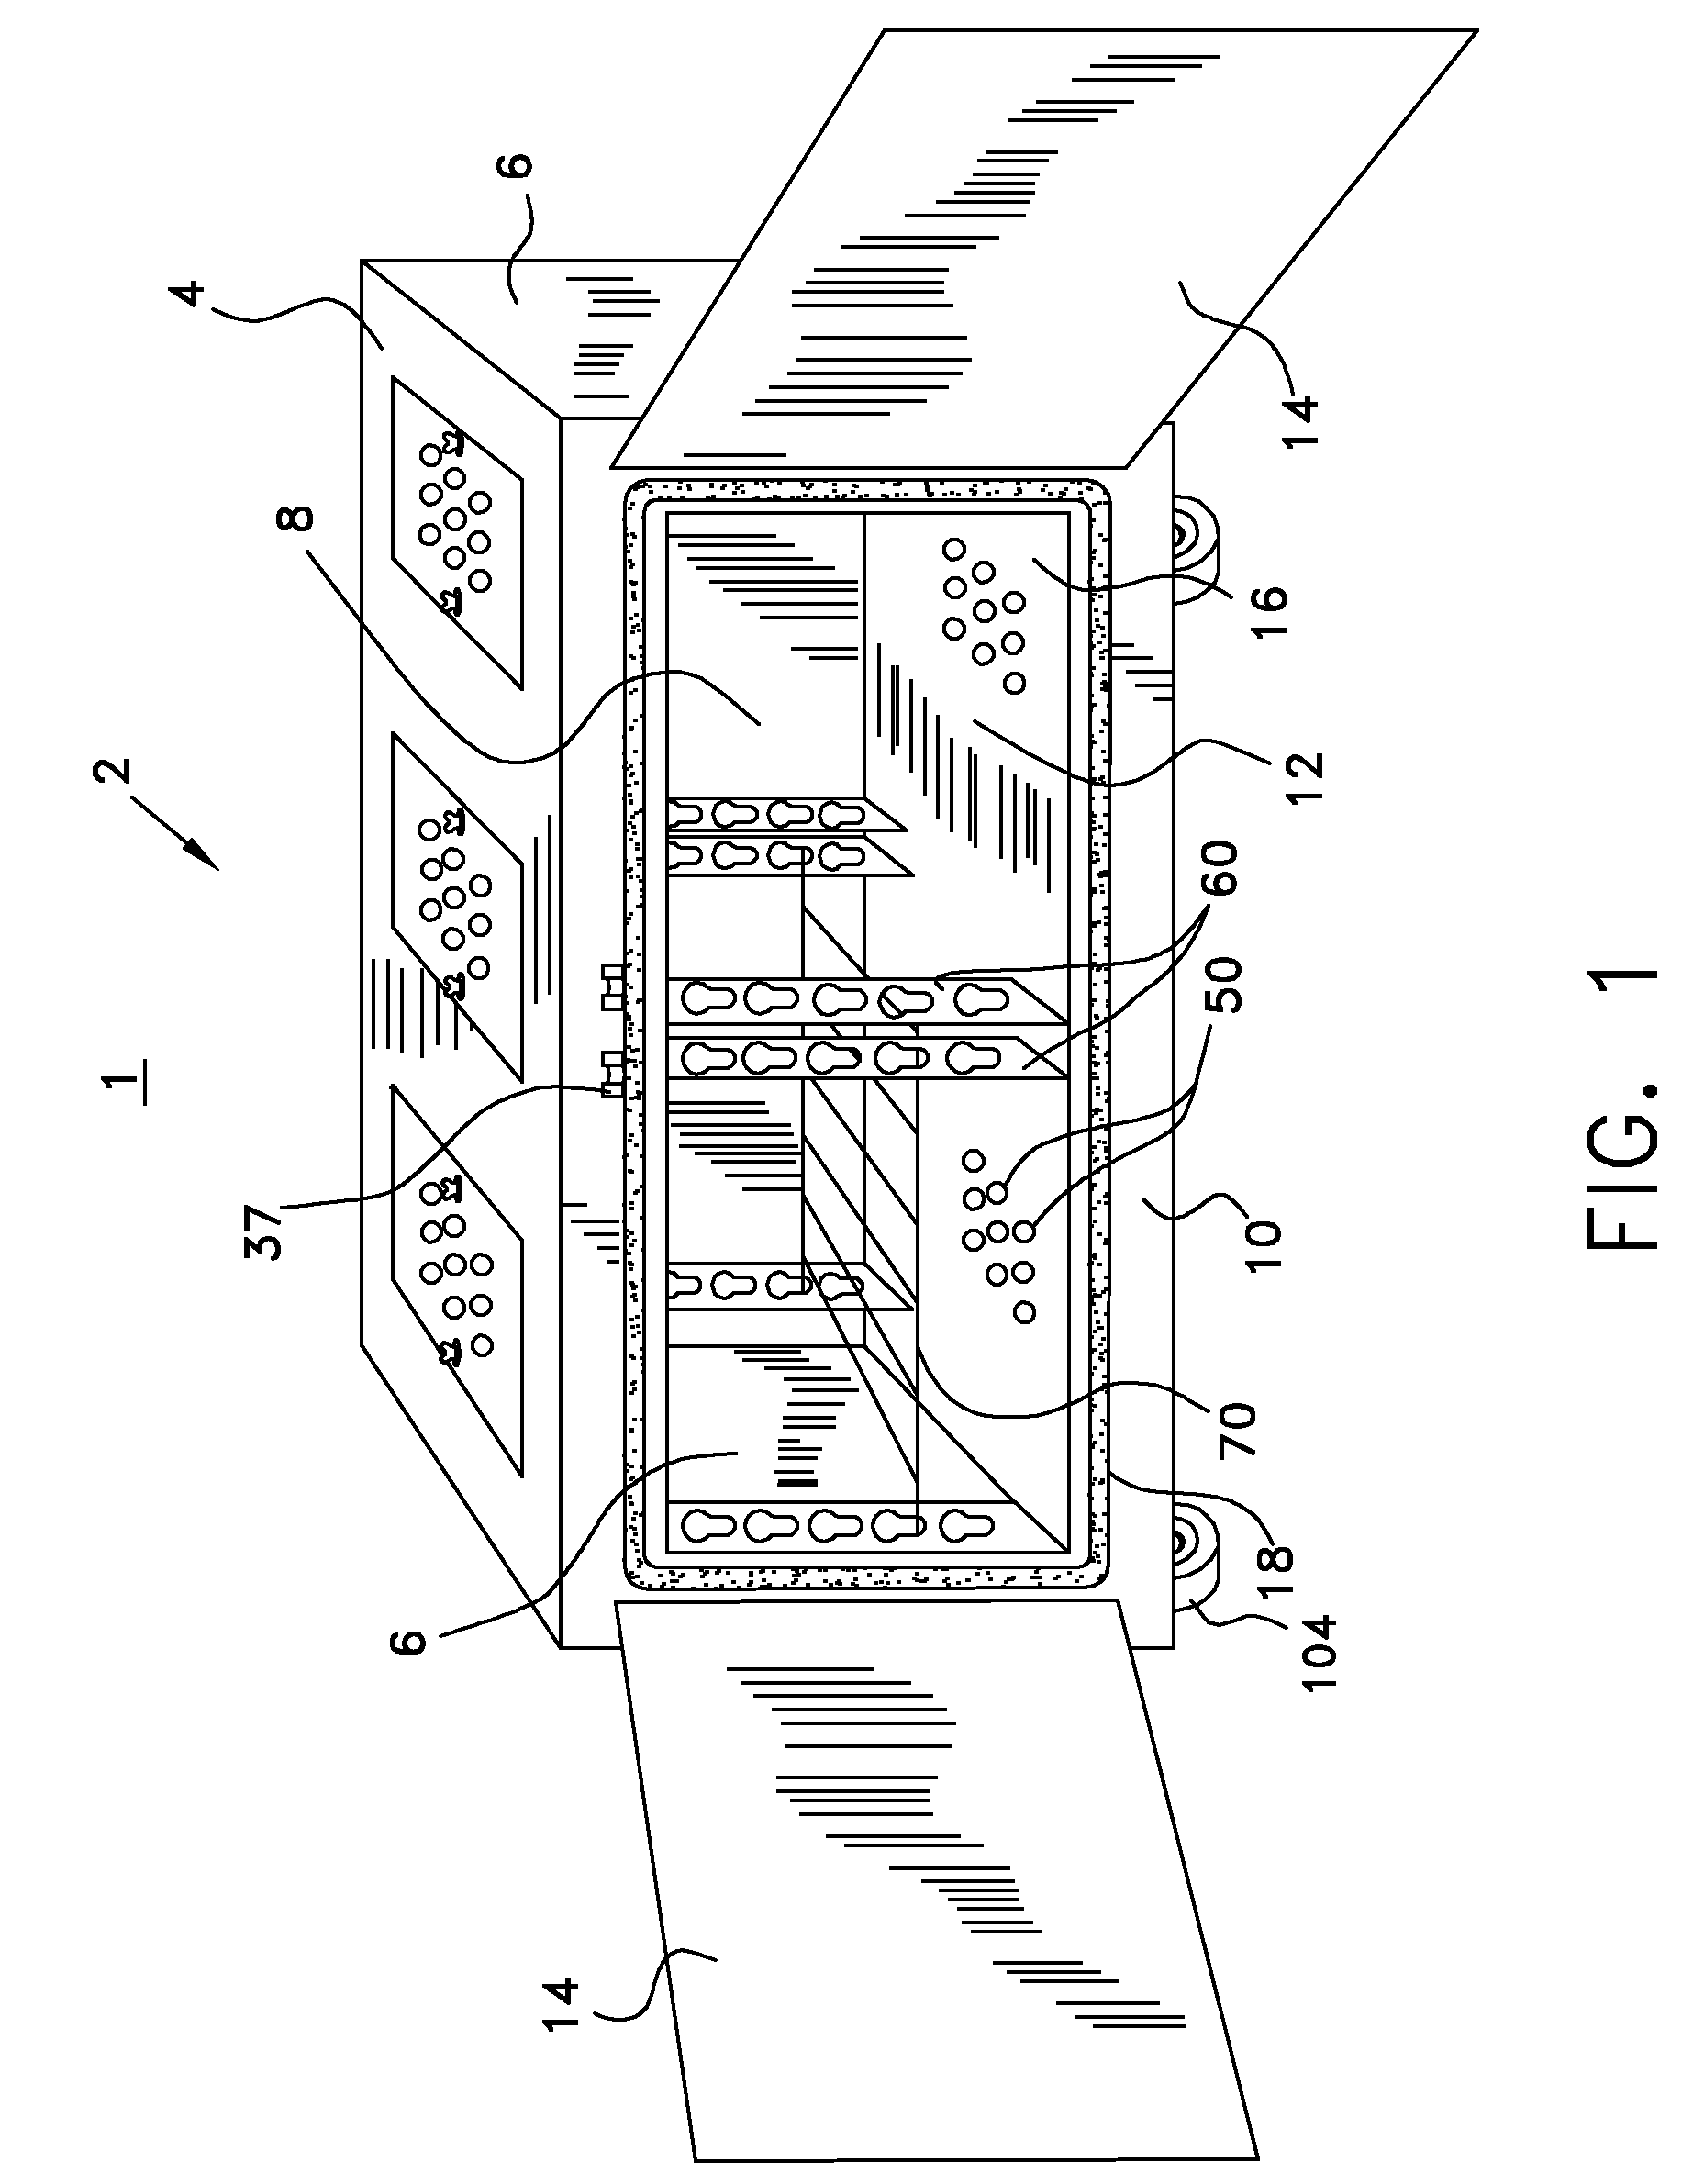 Mobile apparatus and method to sterilize surgical trays